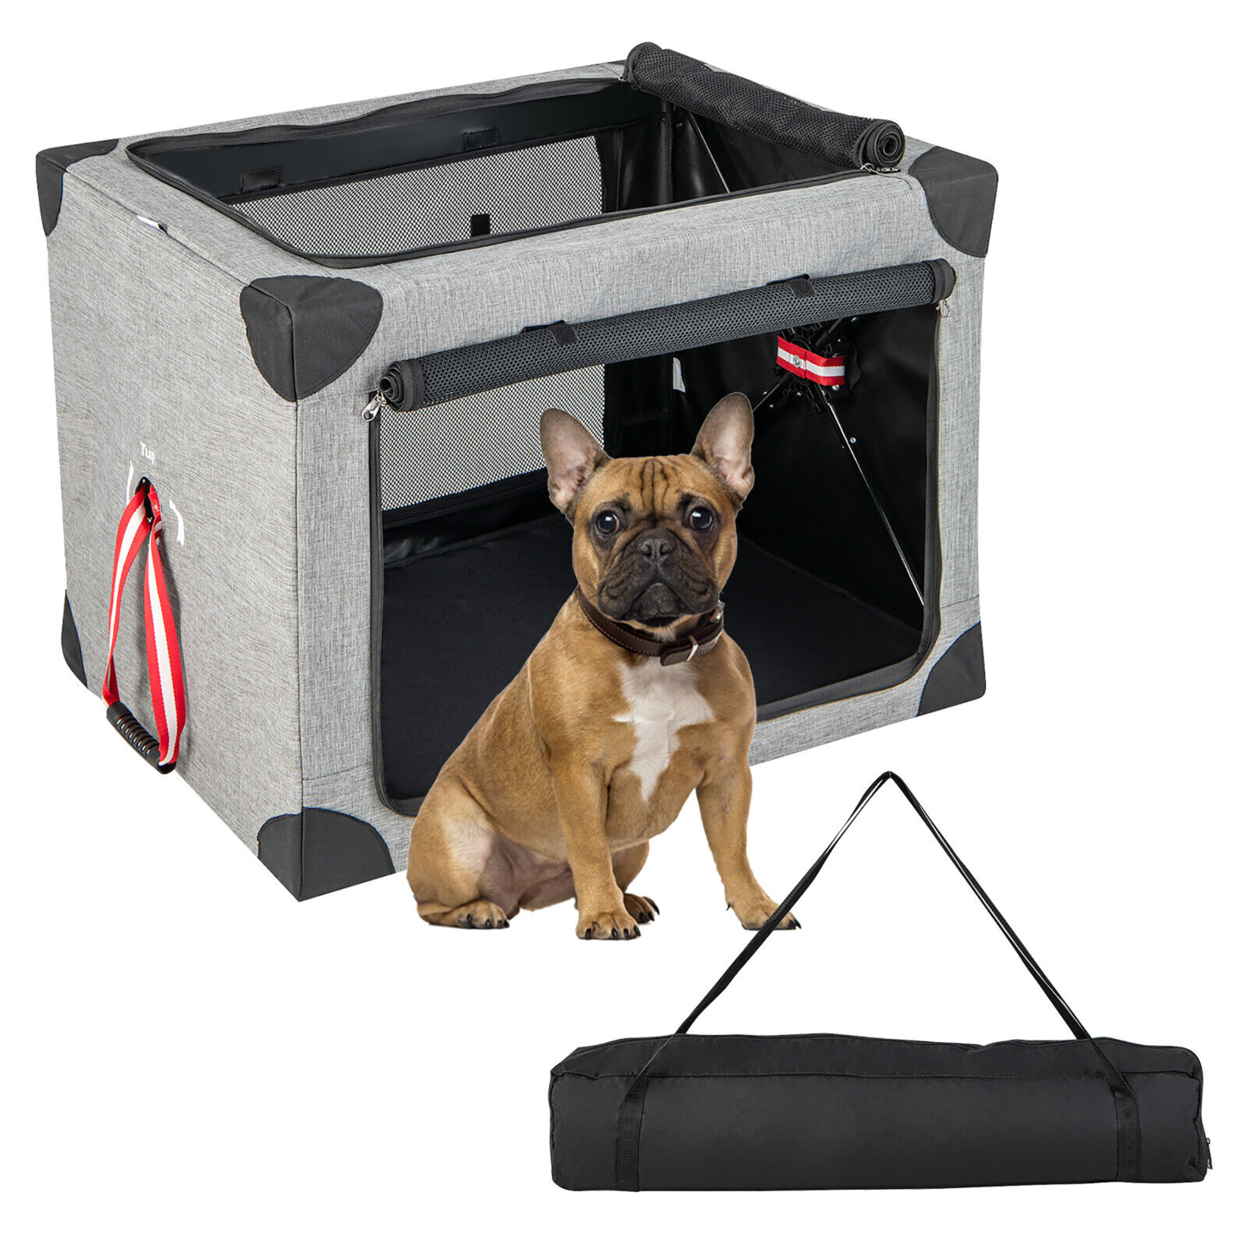 26/32/37 In Portable Folding Dog Crate W/ Mesh Mat & Locking Zippers For Cat Carrier Use - L